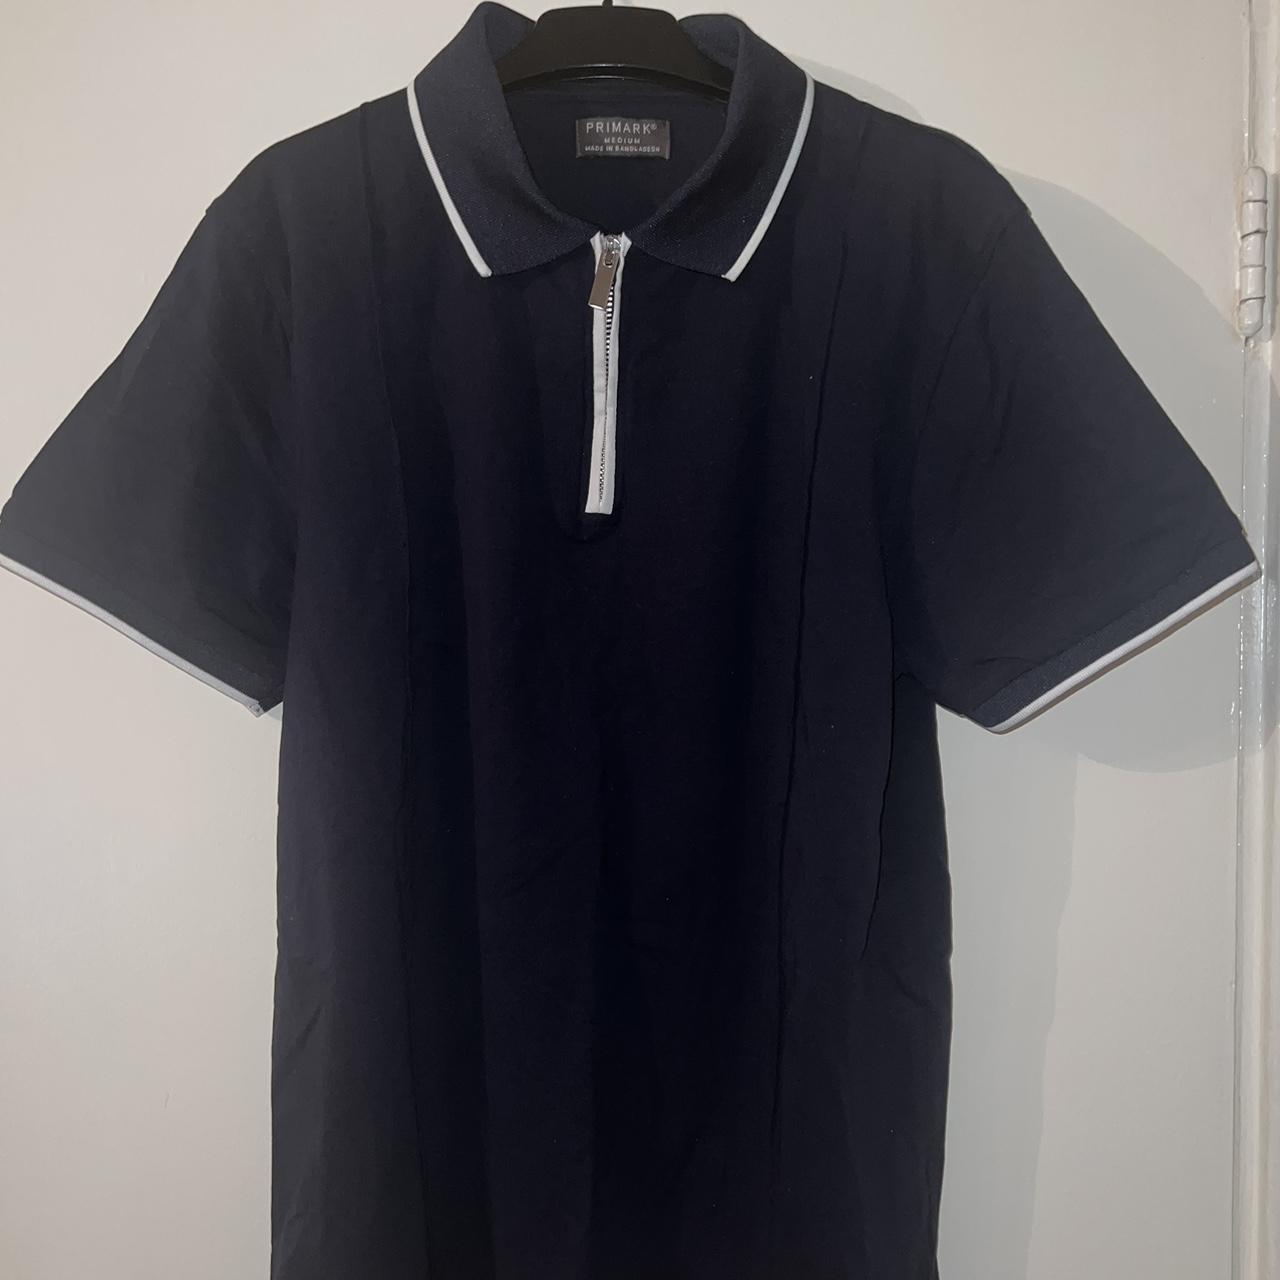 Primark Men's Navy and White Polo-shirts | Depop